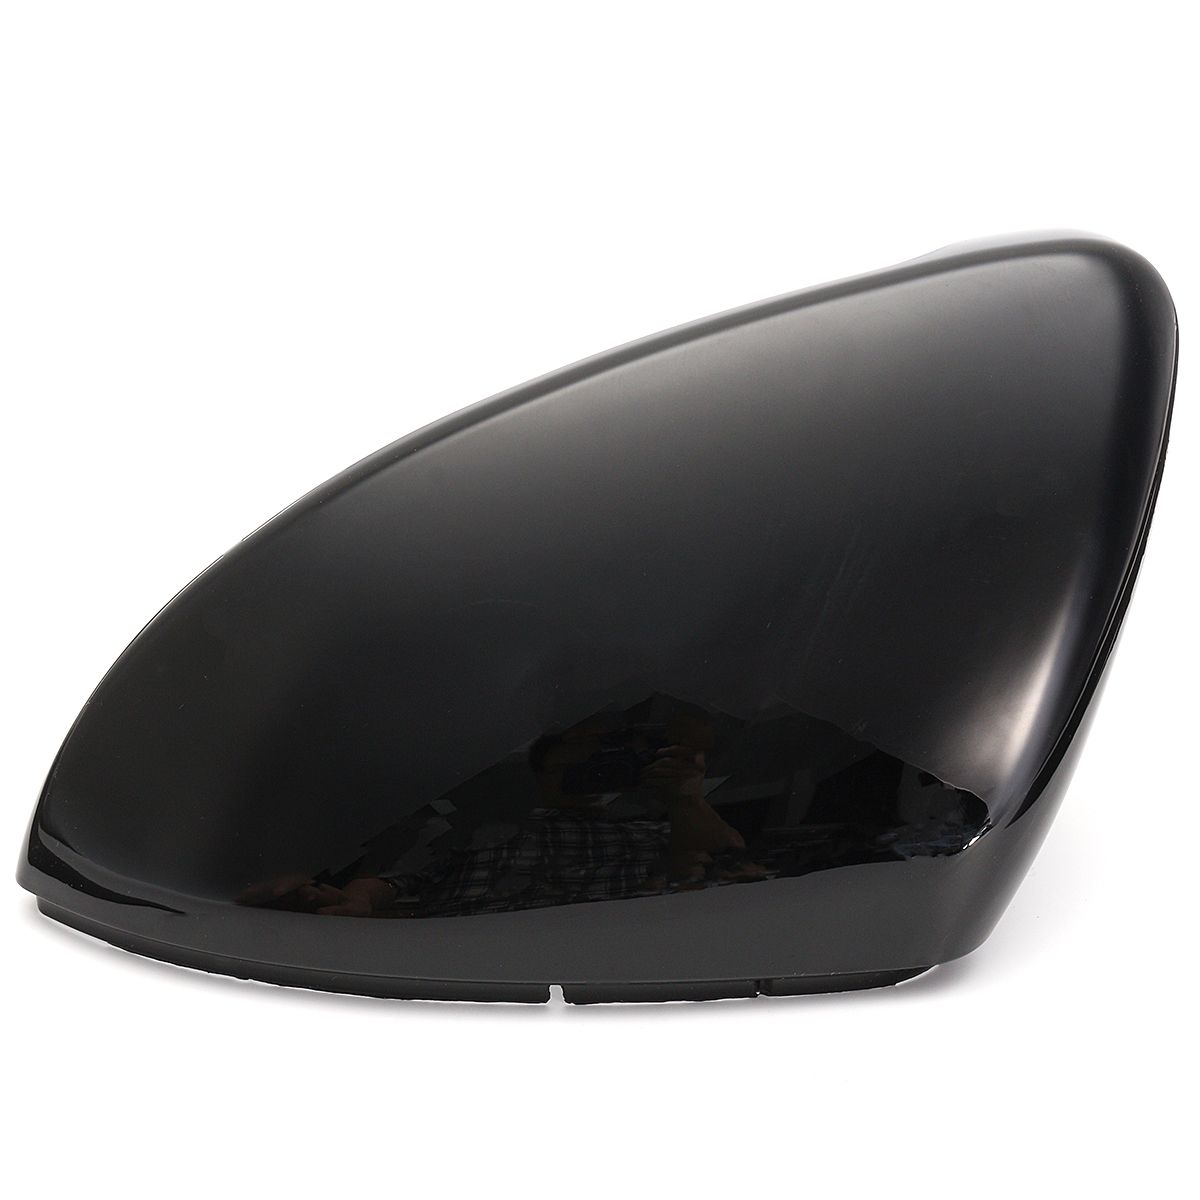 2pcs-1-Pair-Front-Wing-Mirror-Cover-Wing-Case-Rear-View-Mirror-Case-Cover-For-VW-1180490